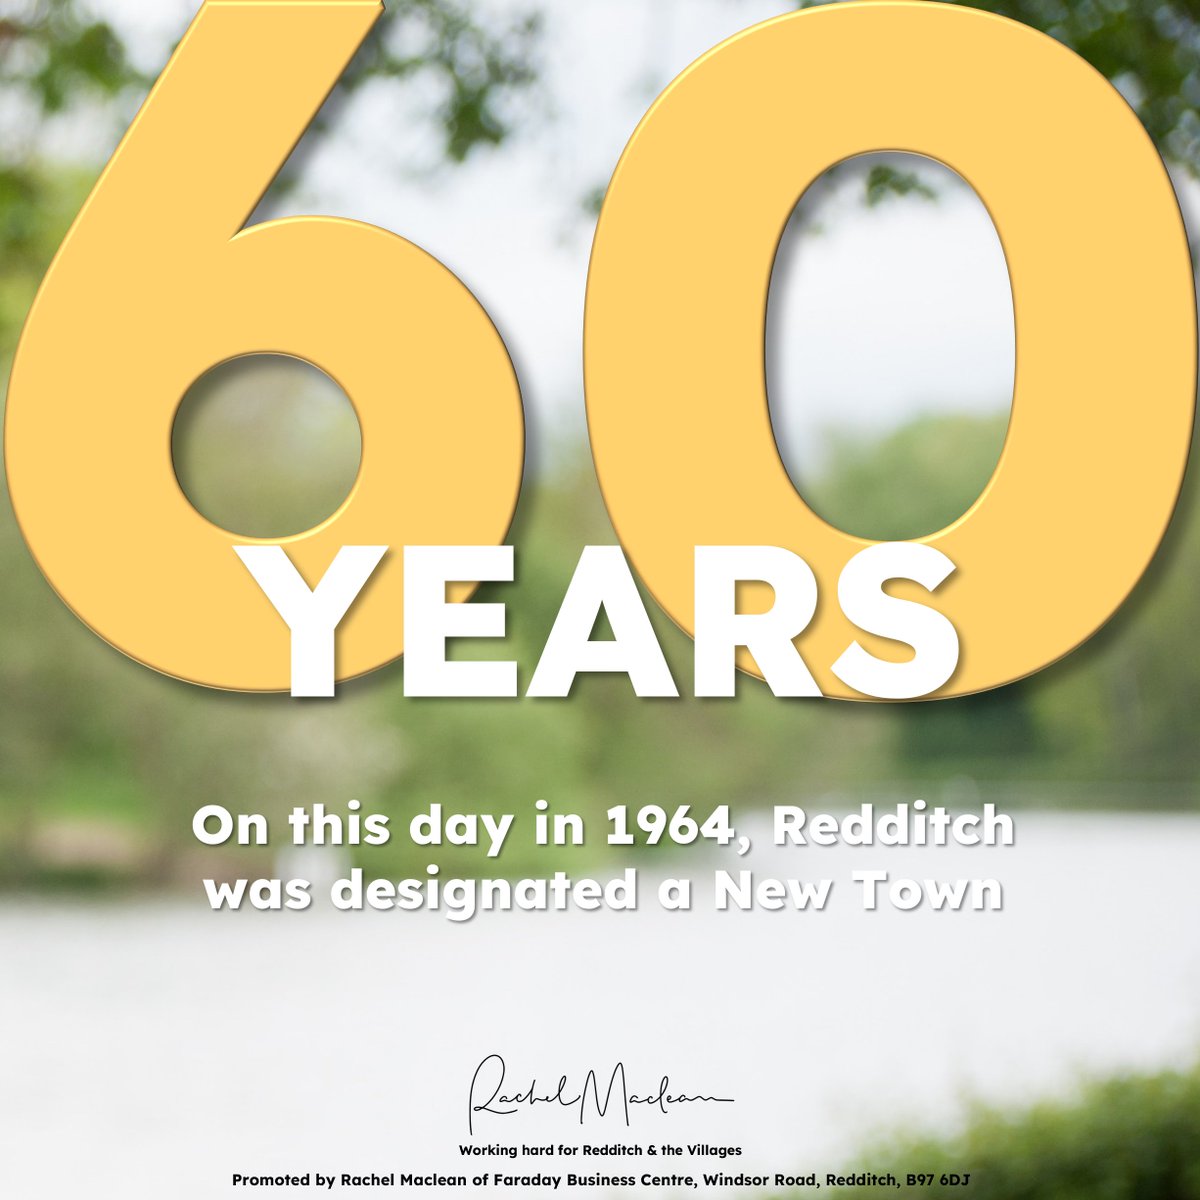 On this day in 1️⃣9️⃣6️⃣4️⃣, Redditch was designated a New Town. Steeped in history, but always with an eye on the future, Redditch remains a great place to live, work and raise a family. It remains the honour of my life to represent this wonderful town.